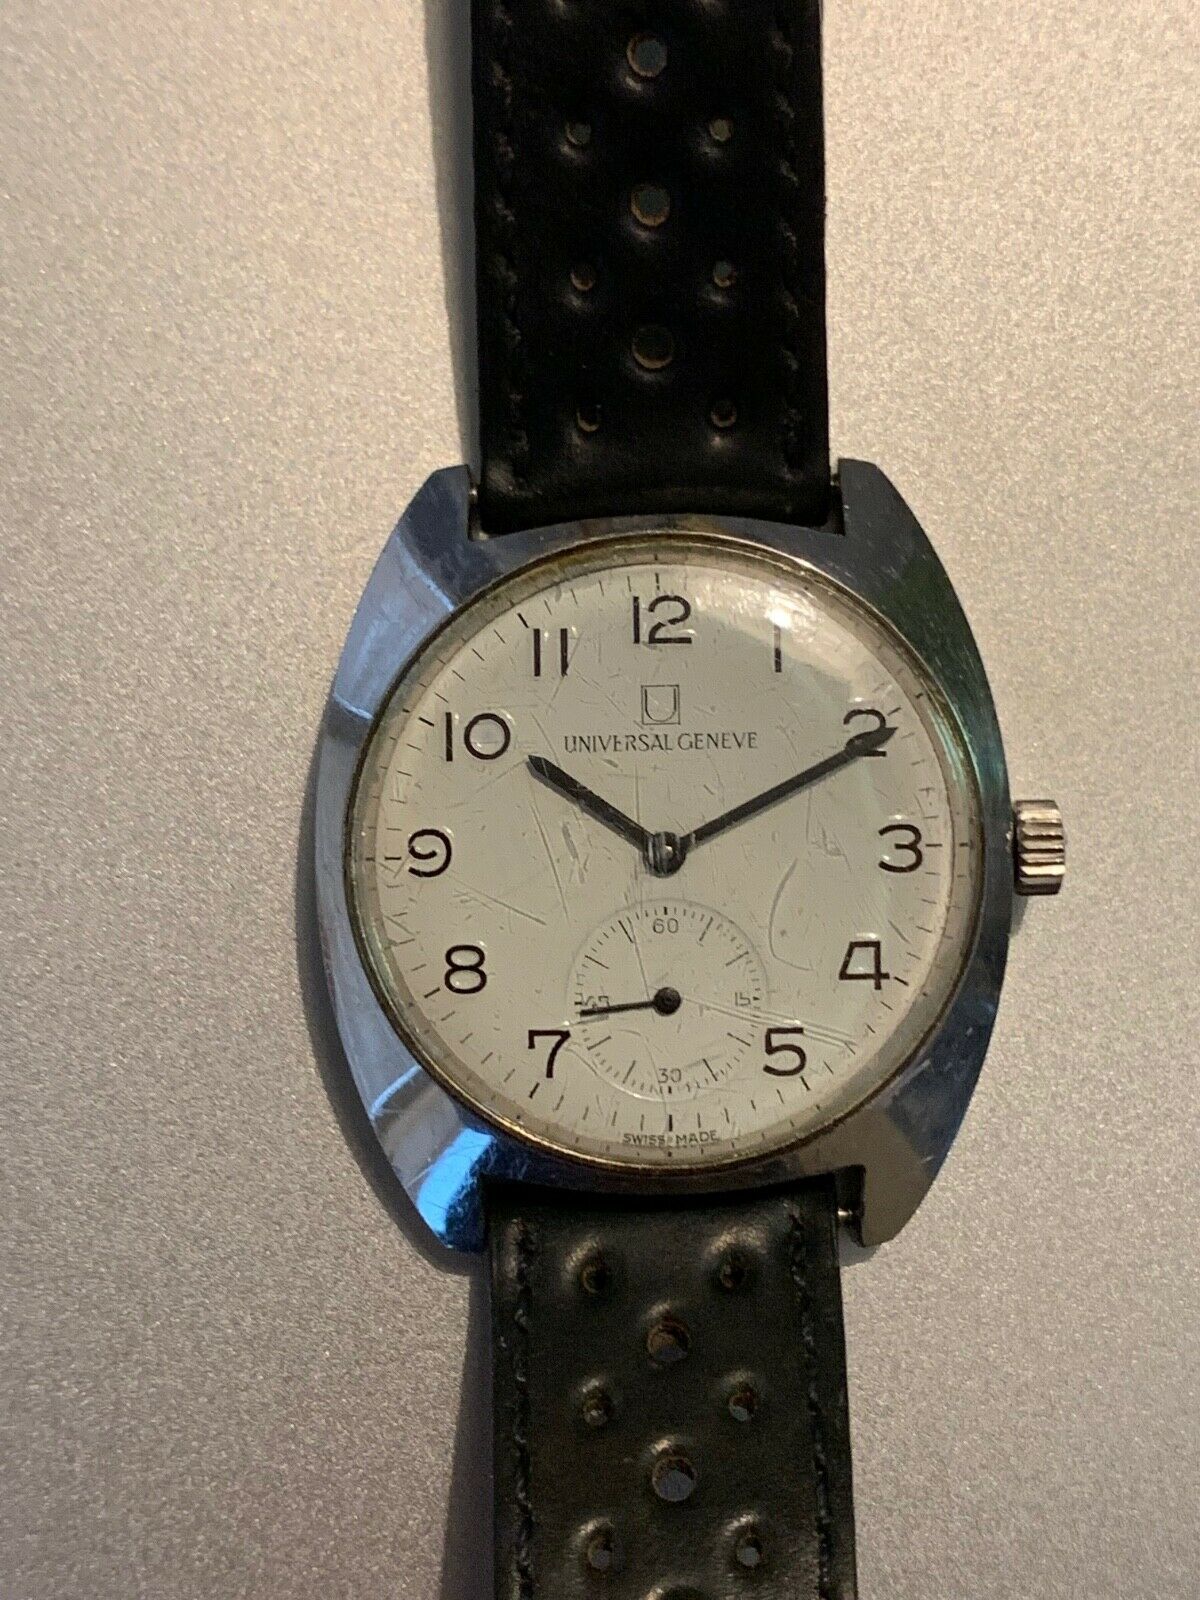 Omega Geneve Ref.136.041 Cal.613 Breguet Numerals Mens Vintage... for $765  for sale from a Private Seller on Chrono24